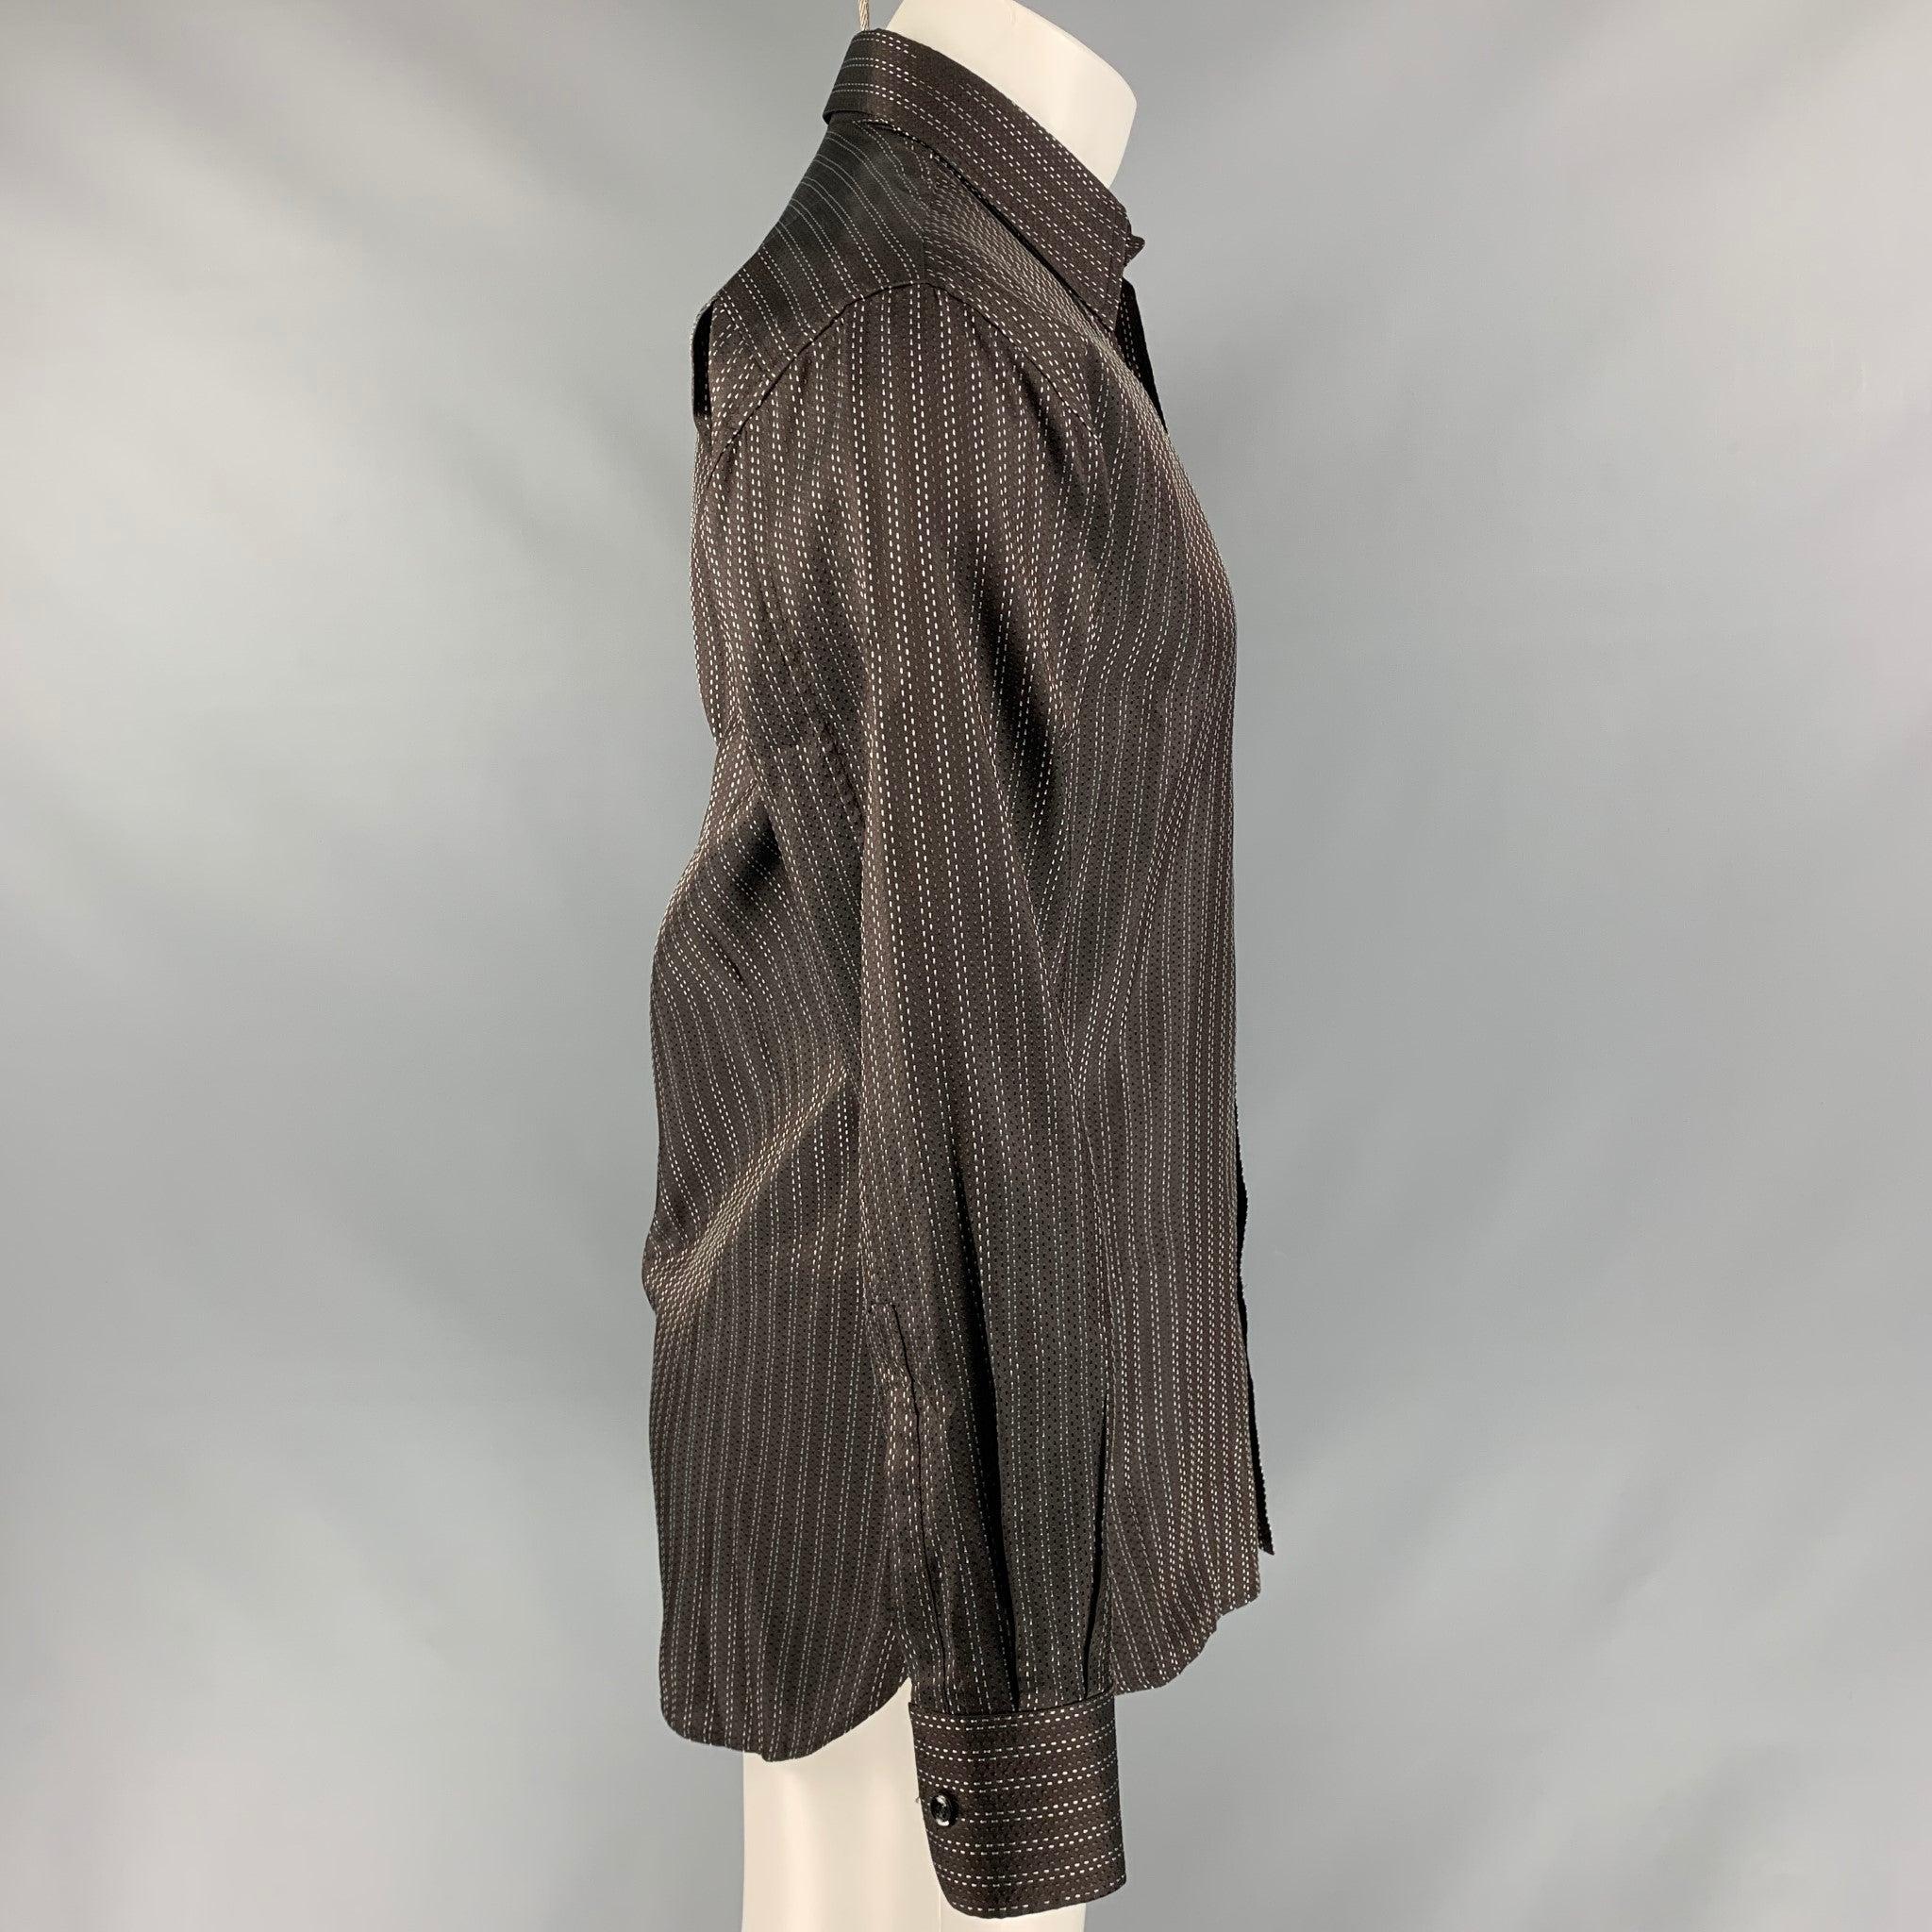 YVES SAINT LAURENT 'Rive Gauche' long sleeve shirt comes in brown and white contrast top stitch fabric featuring a straight collar, a buttoned closure and one button angle cuff. Excellent Pre-Owned Condition. 

Marked:   15.5/ 40 

Measurements: 
